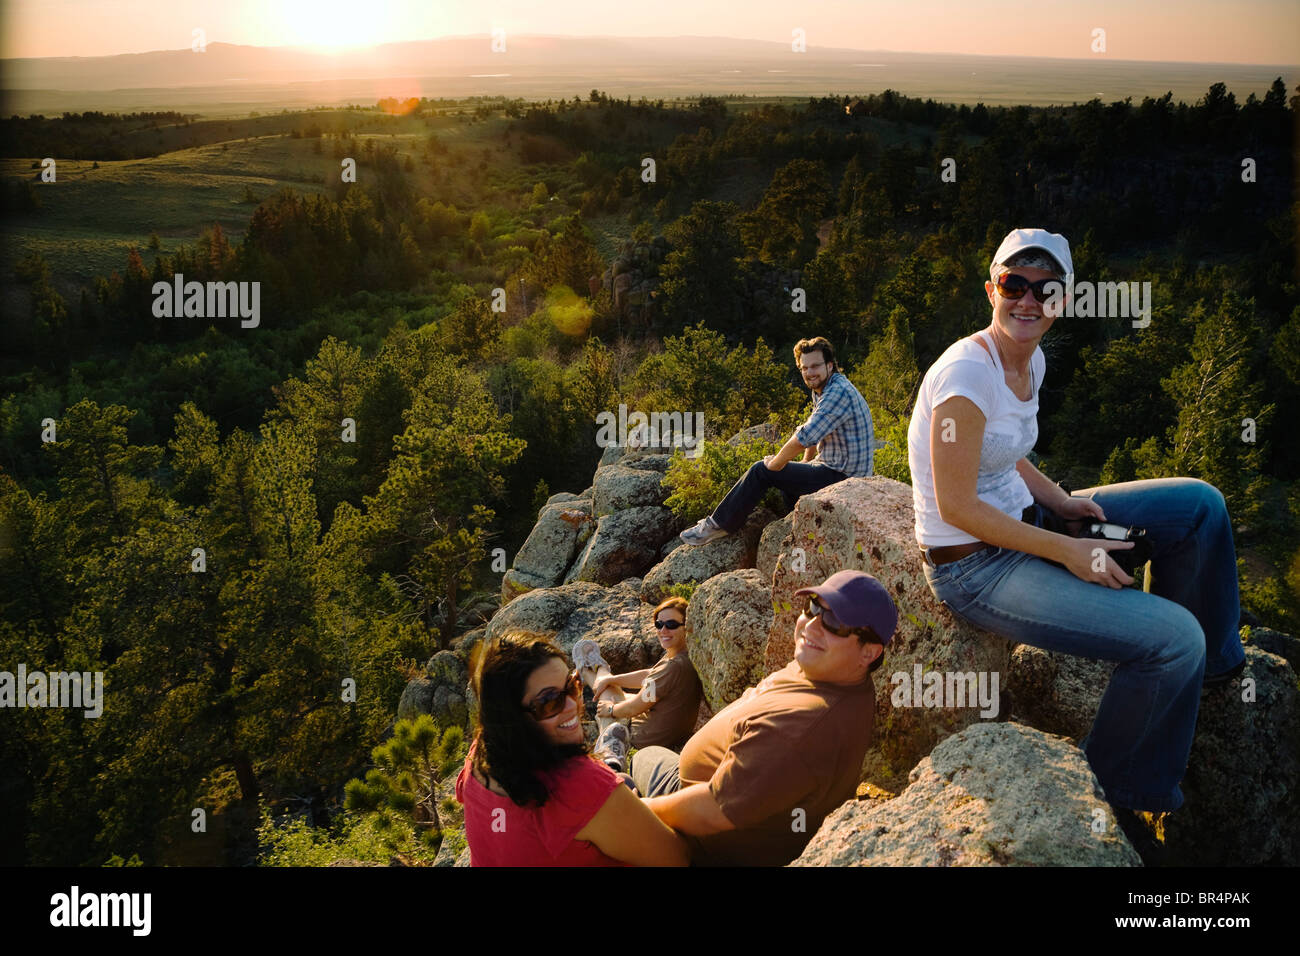 Friends resting on rocks in remote area Stock Photo